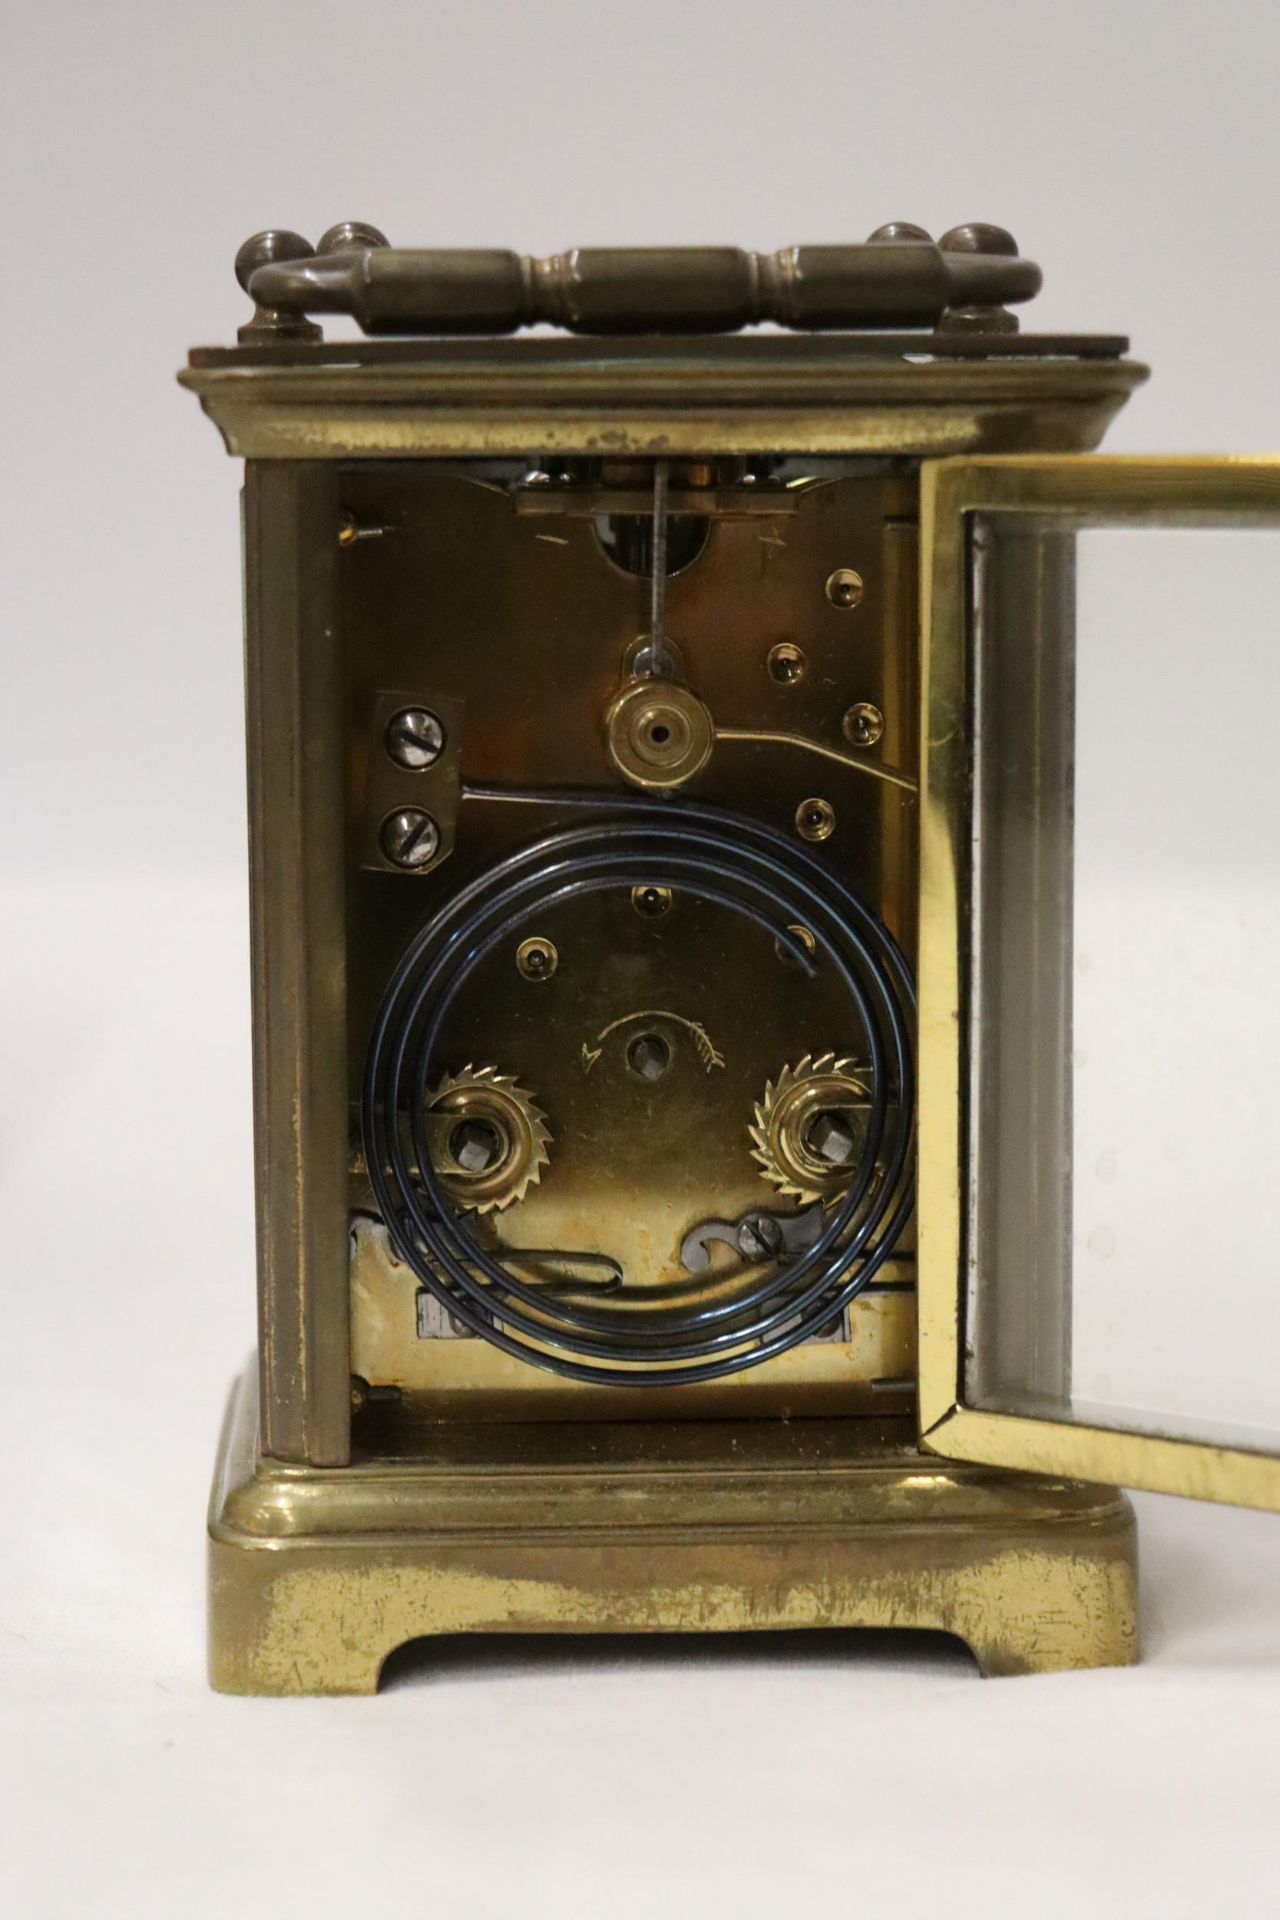 A VINTAGE BRASS ALARM CLOCK WITH GLASS SIDES TO SHOW INNER WORKINGS, IN A LEATHER CASE - Image 7 of 11